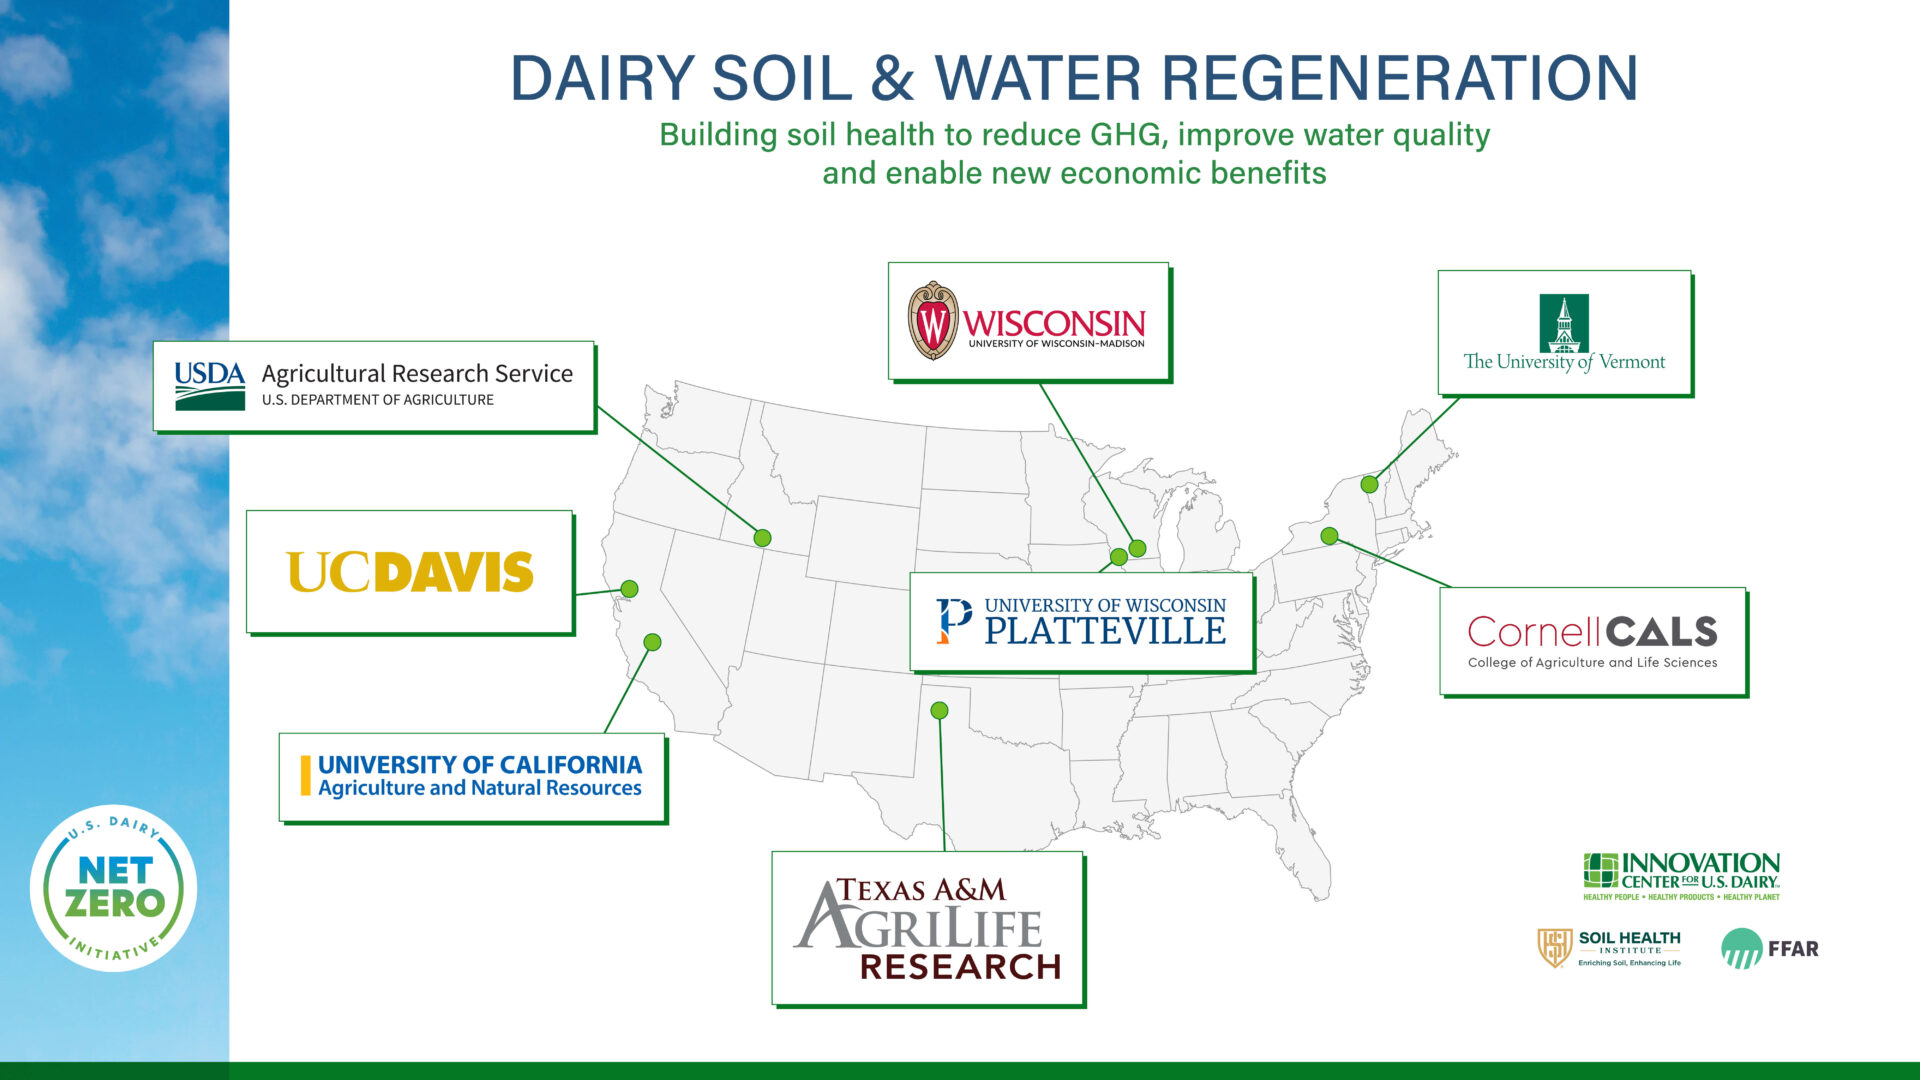 Dairy Soil & Water Regeneration. Building soil health to reduce GHG, improve water quality and enable new economic benefits.